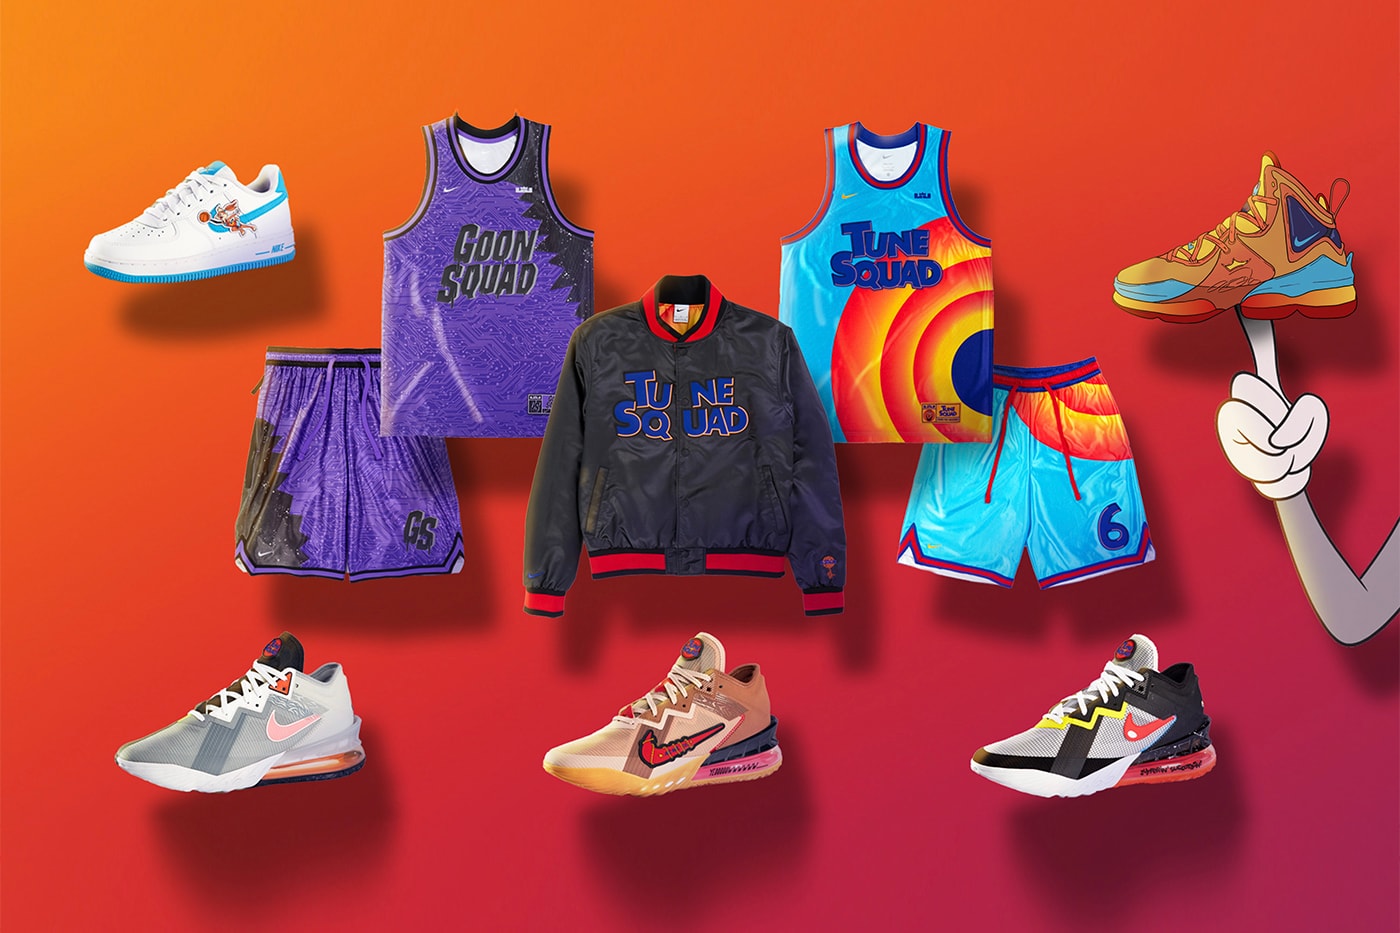 Nike's The Town Jerseys More Than Just Trend-Setting Cash Grab